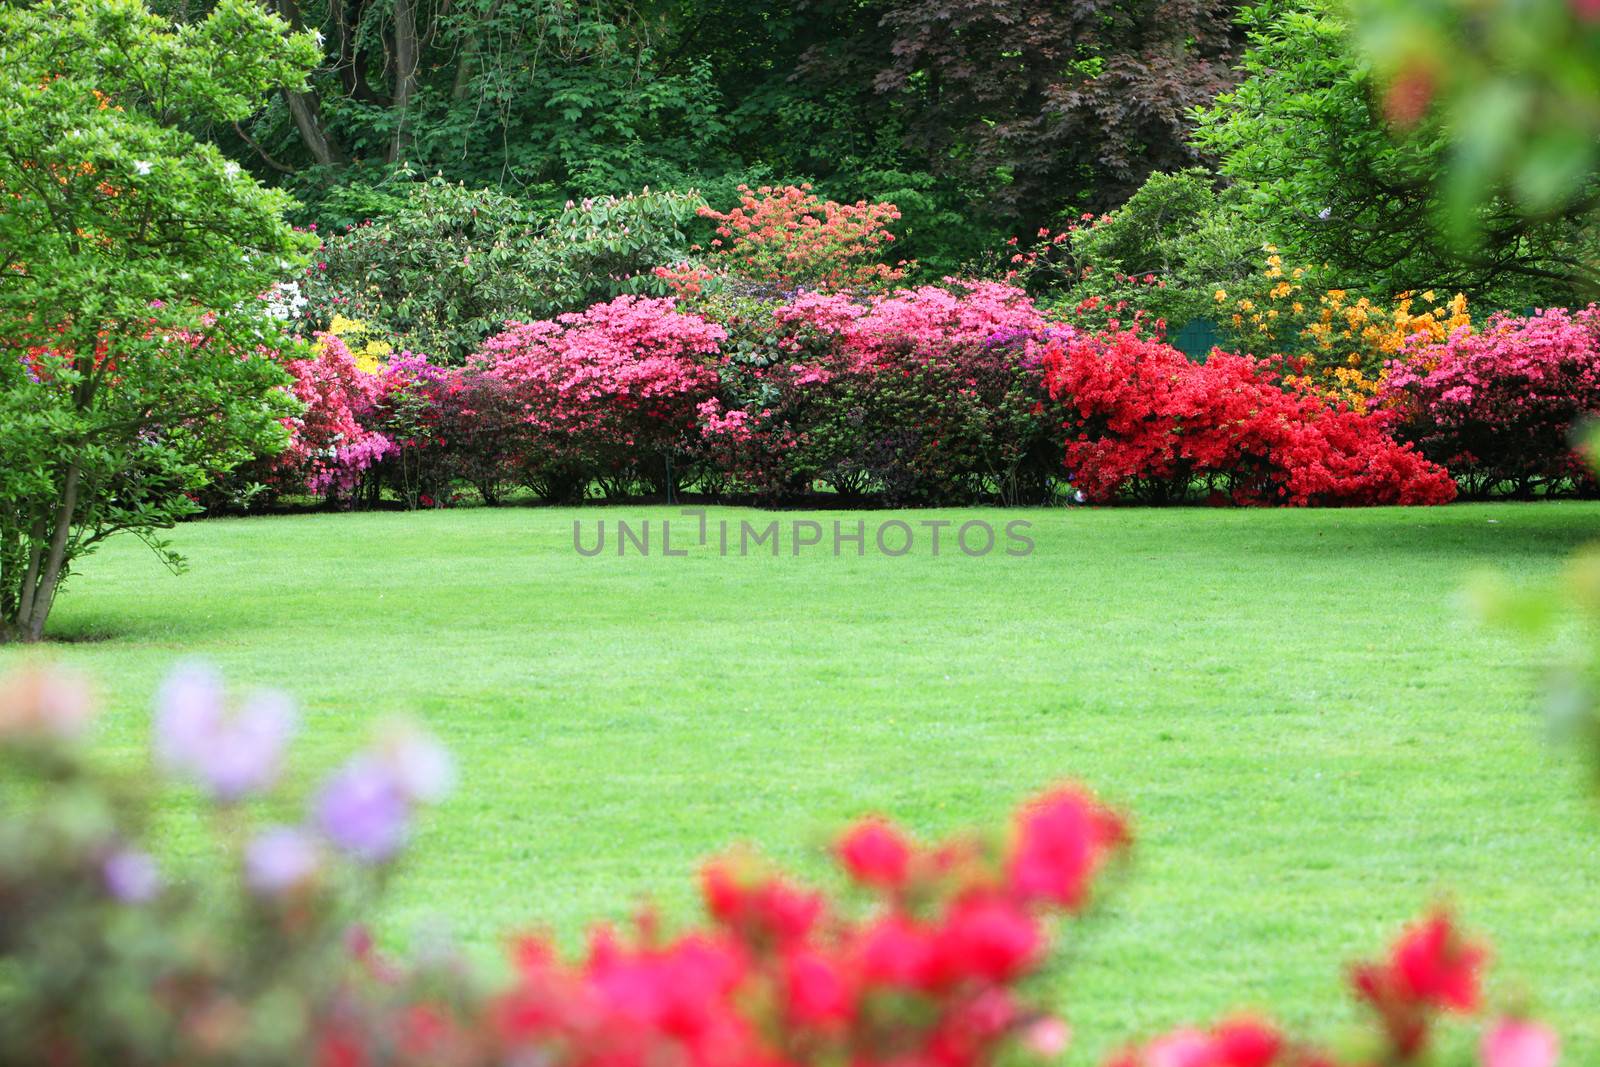 Beautiful garden with flowering shrubs, a neat manicured lawn and colourful display of pink and red azaleas